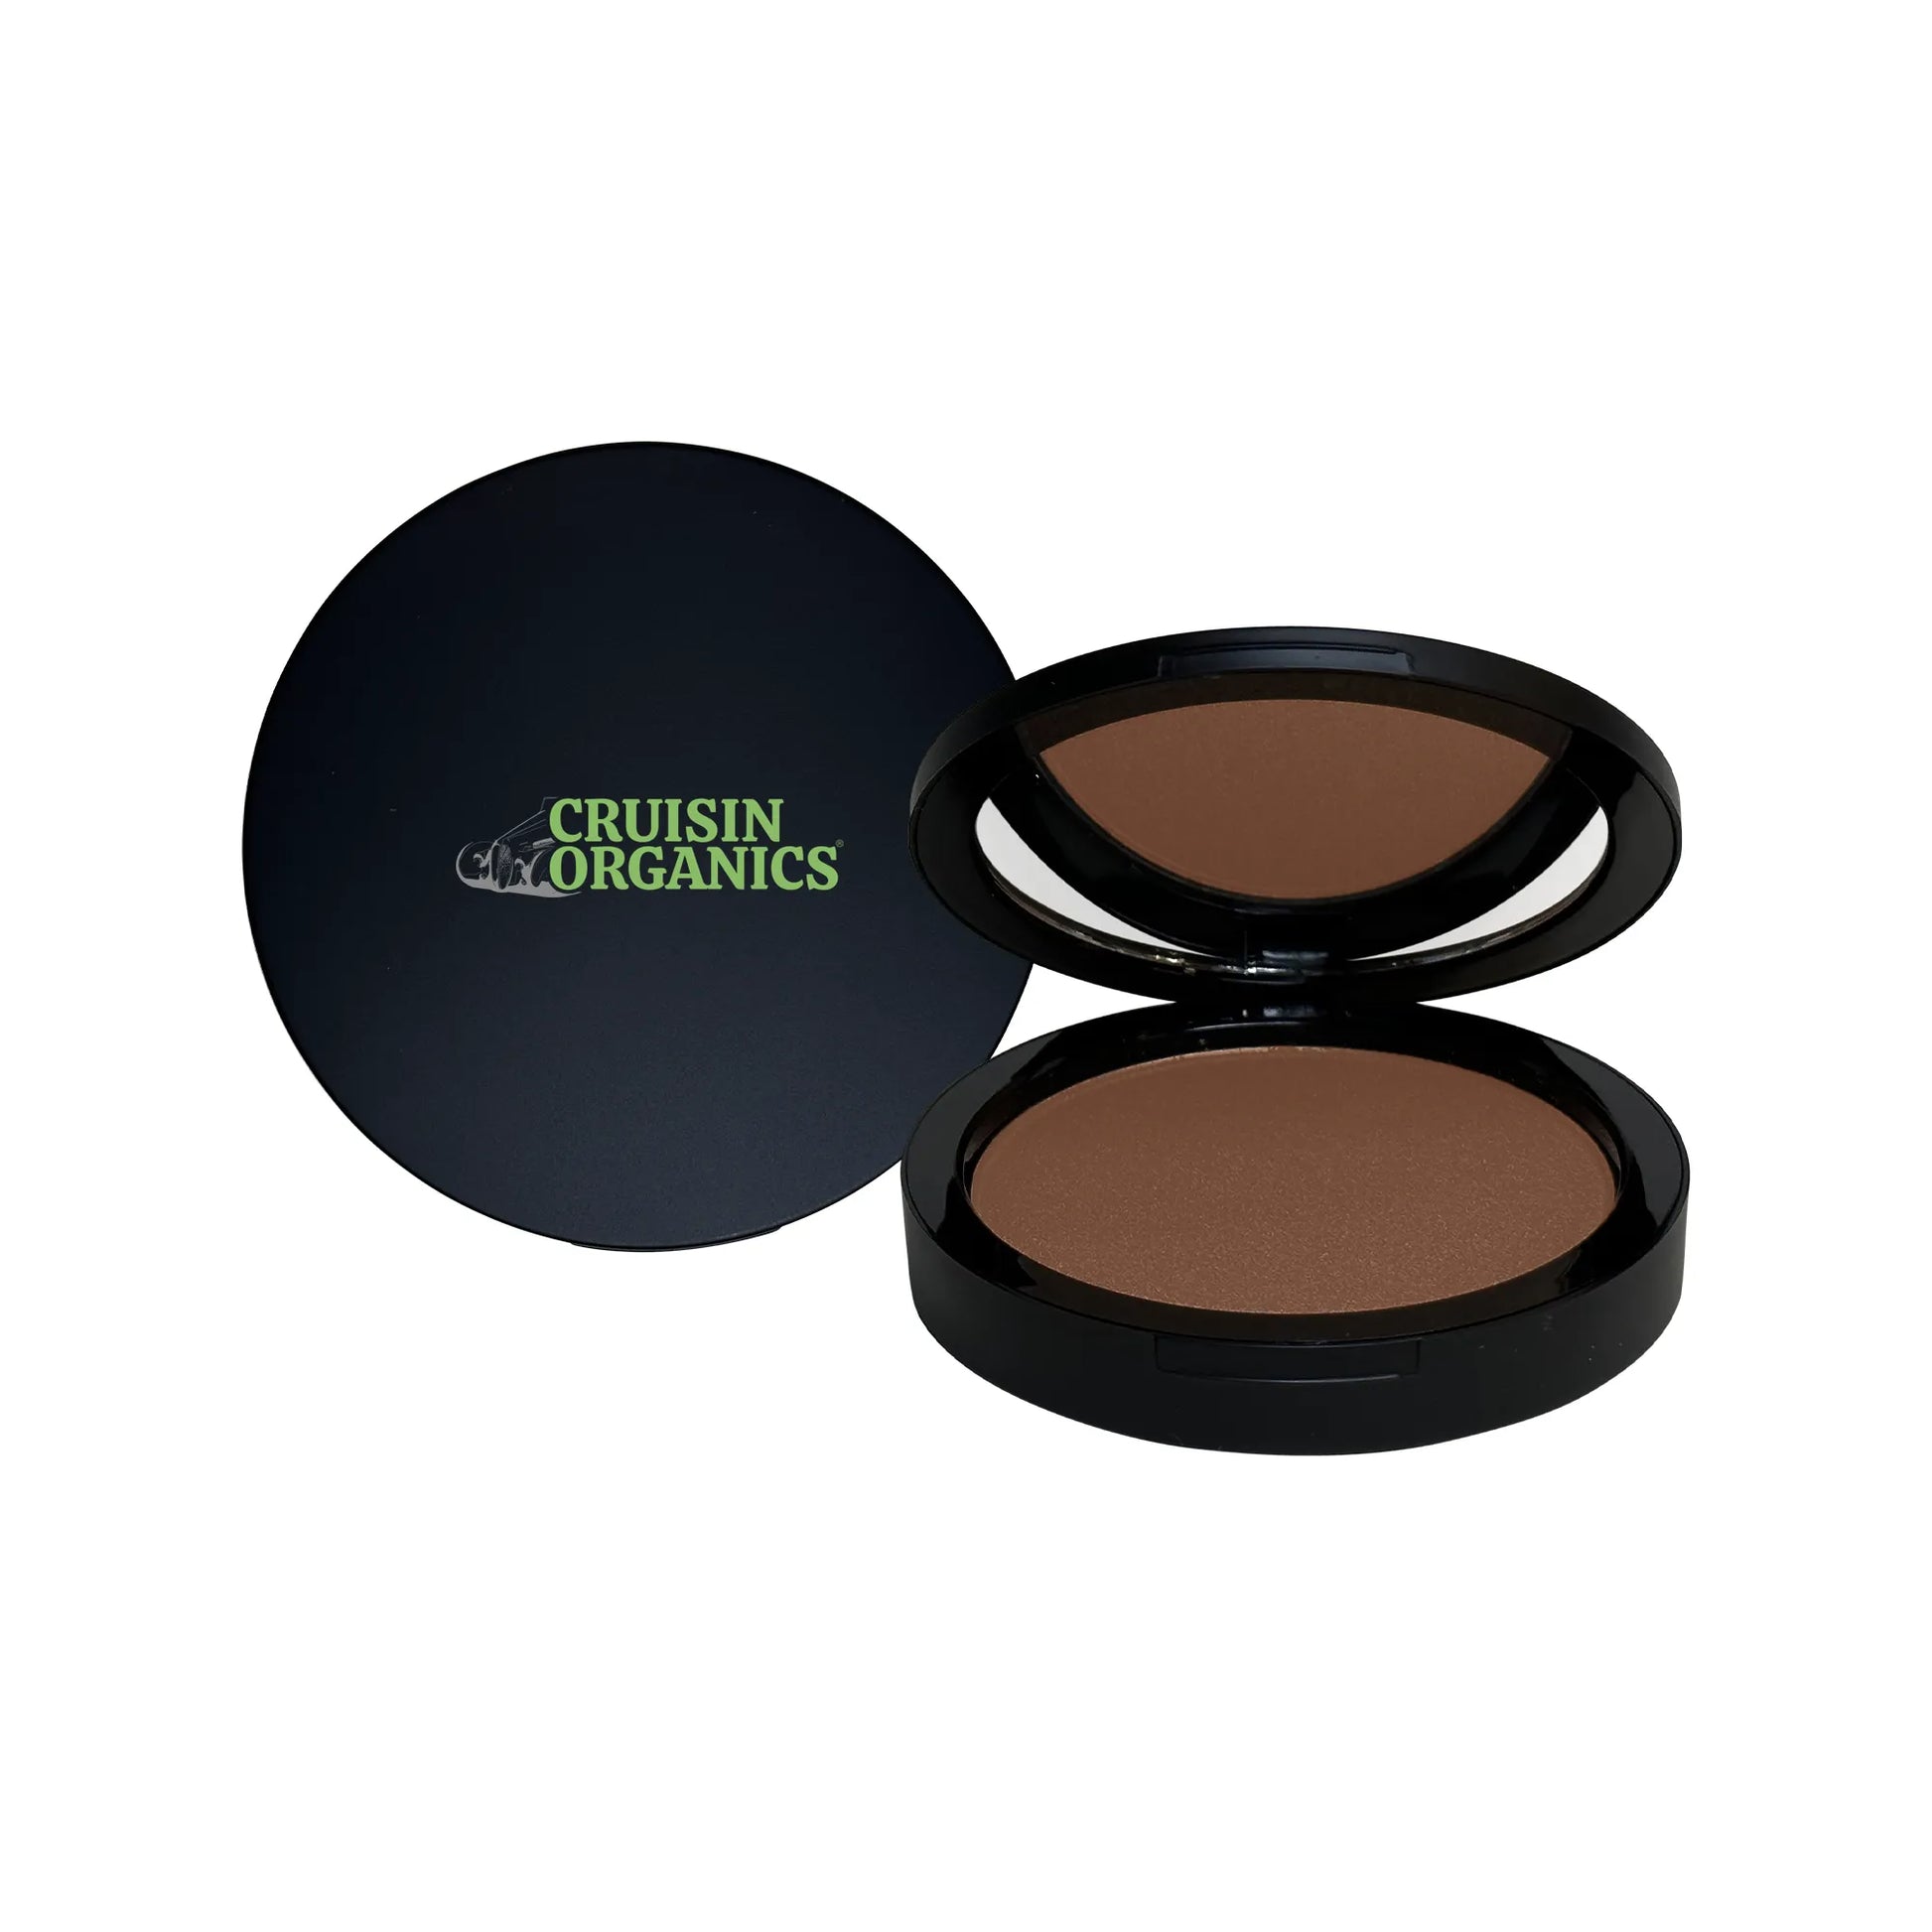 "Experience a year-round sun-kissed radiance with the Pecan Bronzer from Cruisin Organics. This silky, matte bronzer, with its rich red and brown tones, gives a natural tan that can be enhanced with colorful blush for a dimensional and radiant look. Say goodbye to fake tans and thank us later!"